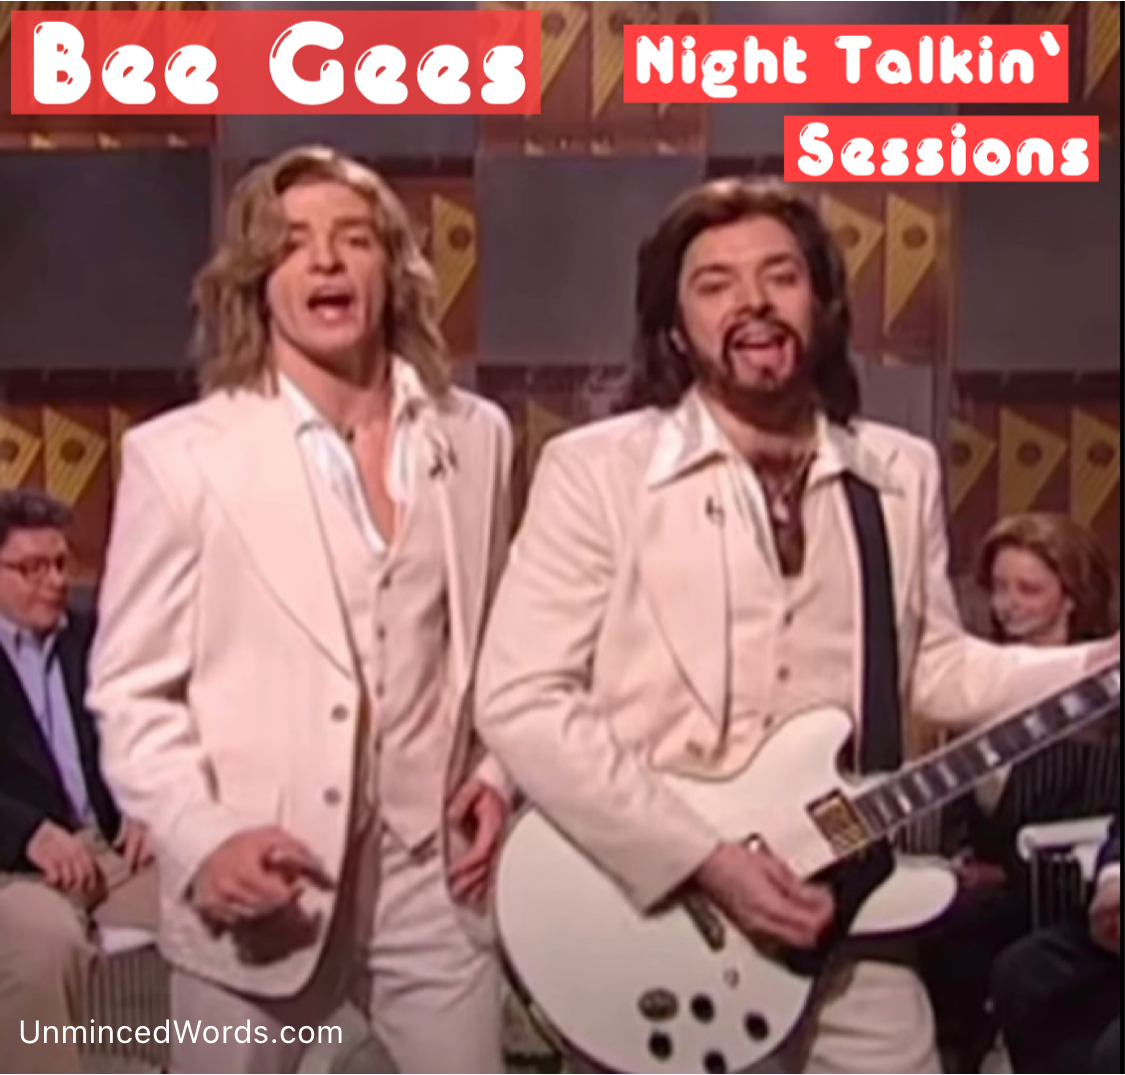 @jimmyfallon @jtimberlake when are you going to spoof the @thebeatles with a mock #GetBack